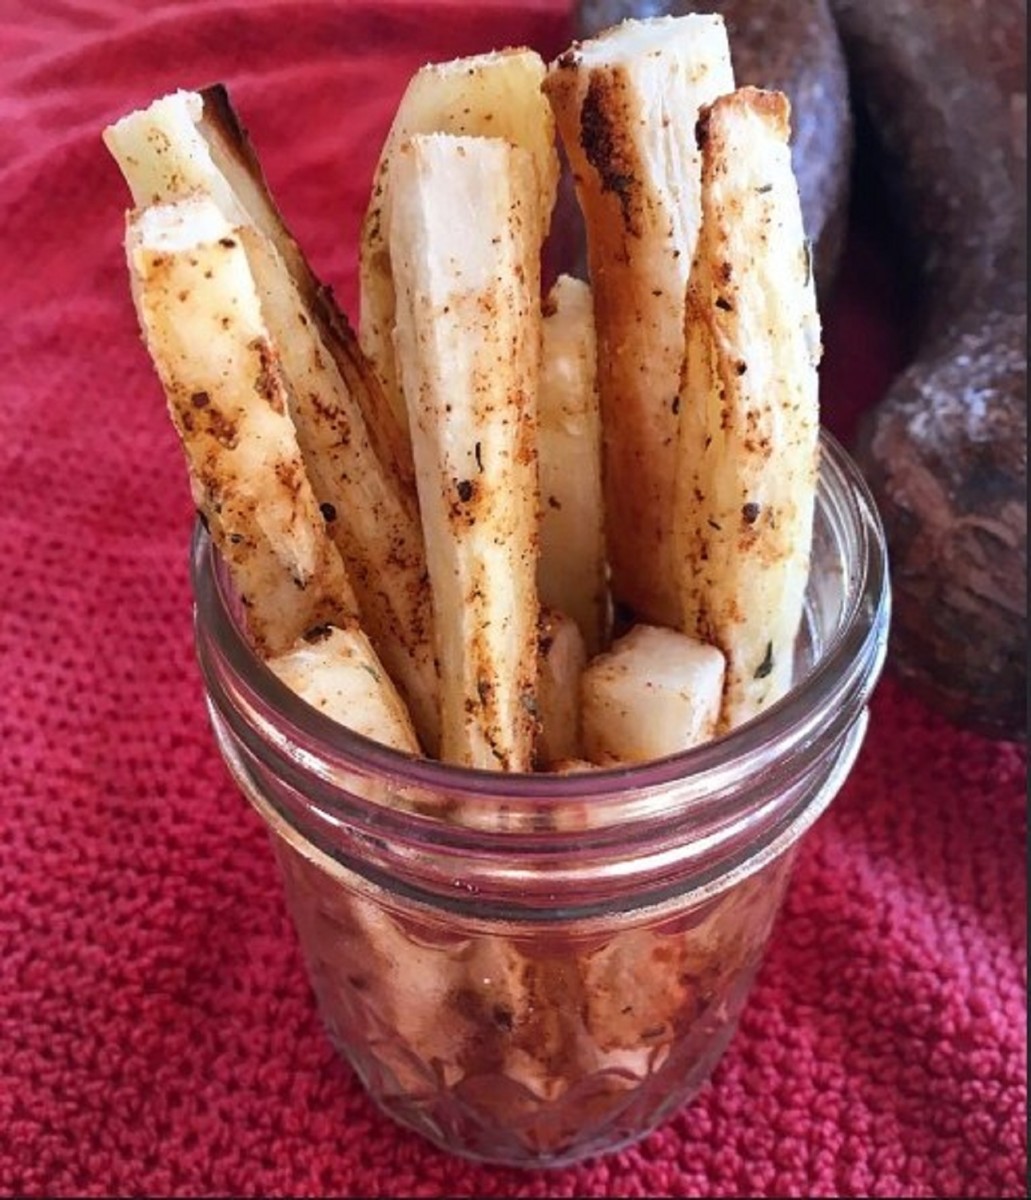 BAKED YUCCA FRIES